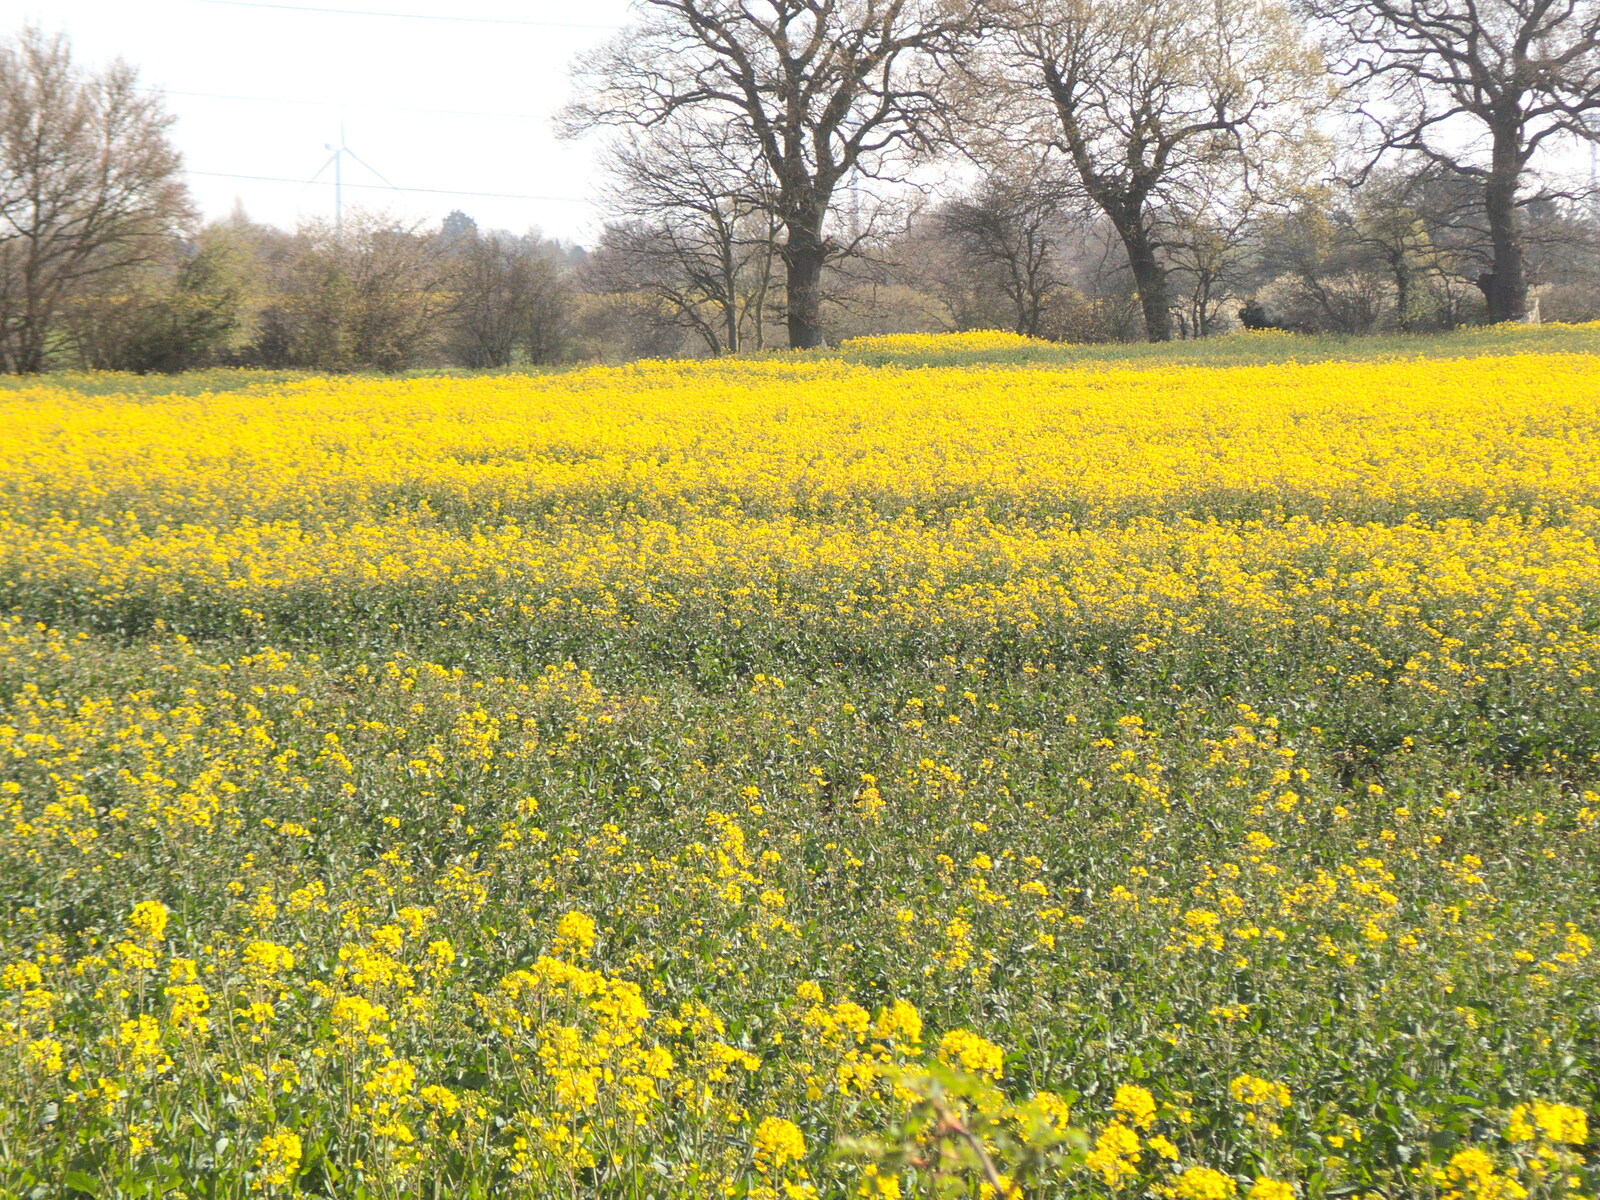 A field of oilseed from A Vaccination Afternoon, Swaffham, Norfolk - 9th May 2021